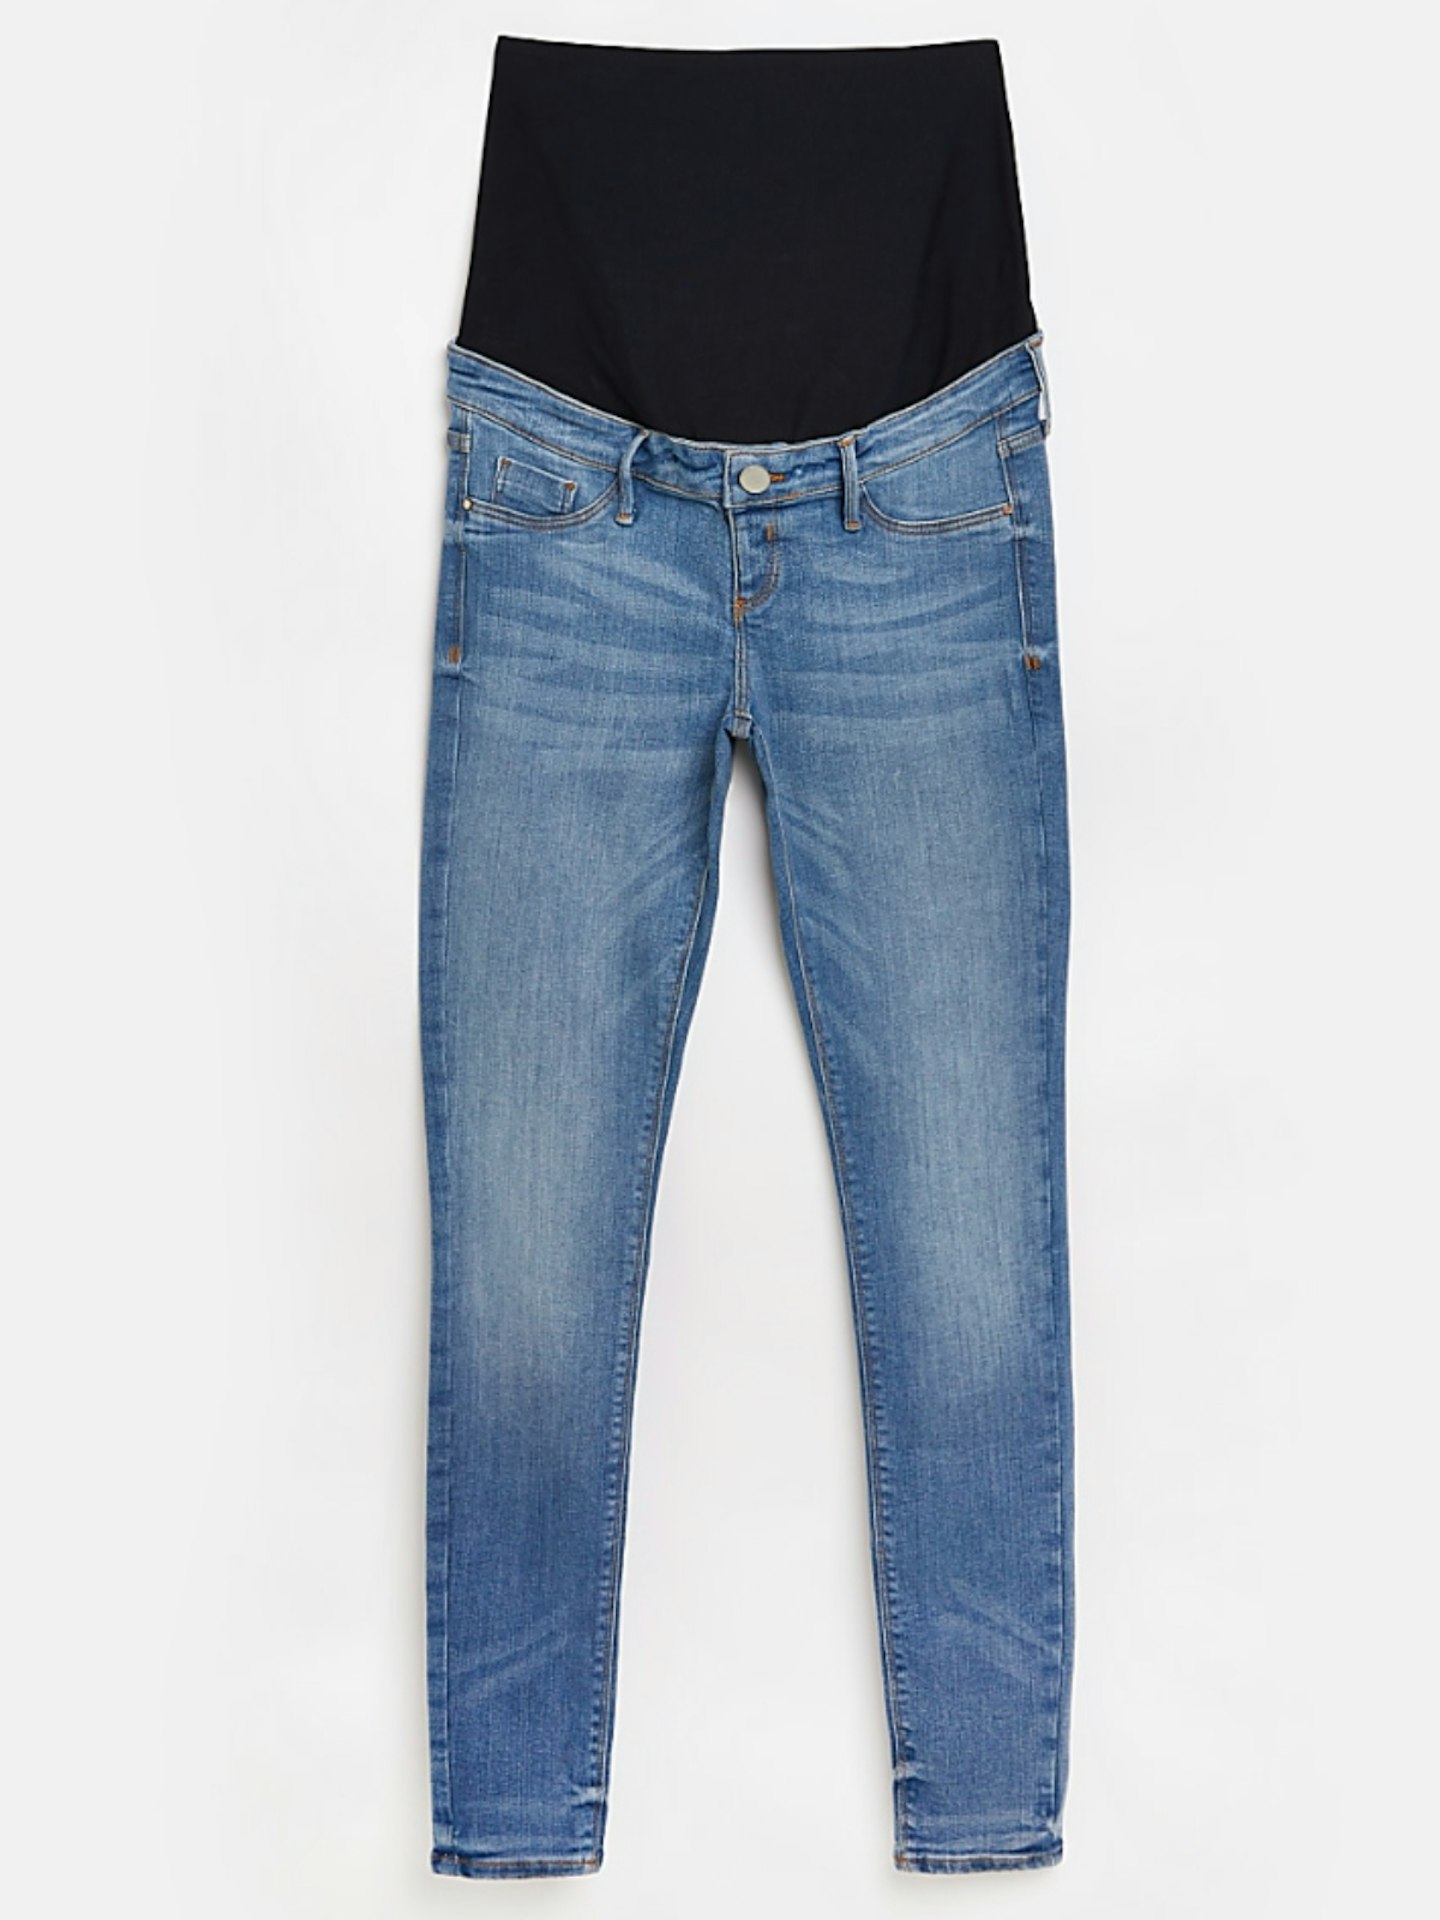 River Island Blue Mid-Rise Maternity Skinny Jeans